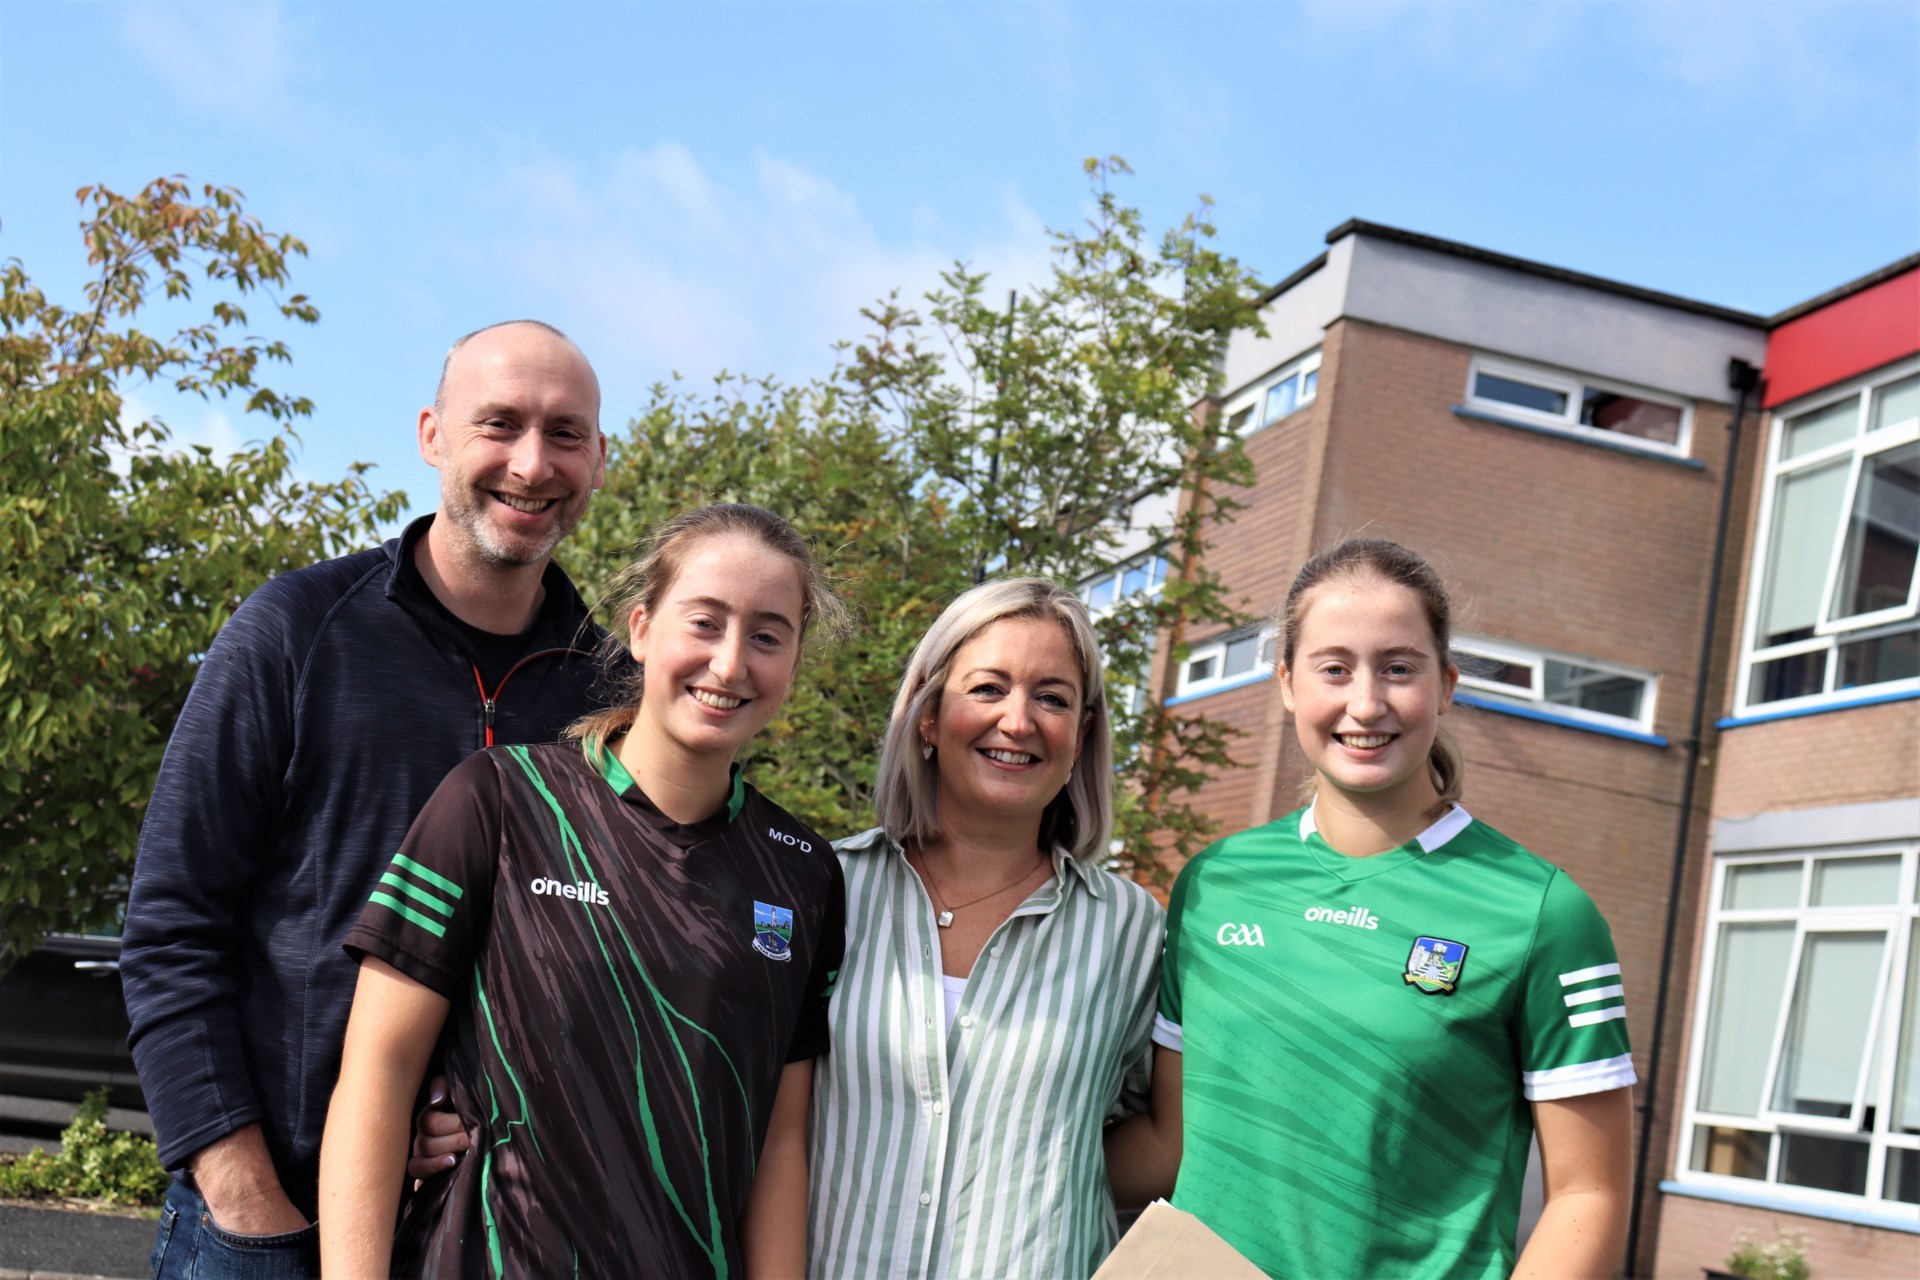 St. Kevins College GCSE students Kevin ODonnell, Ciara ODonnell and twins Eva and Molly ODonnell.